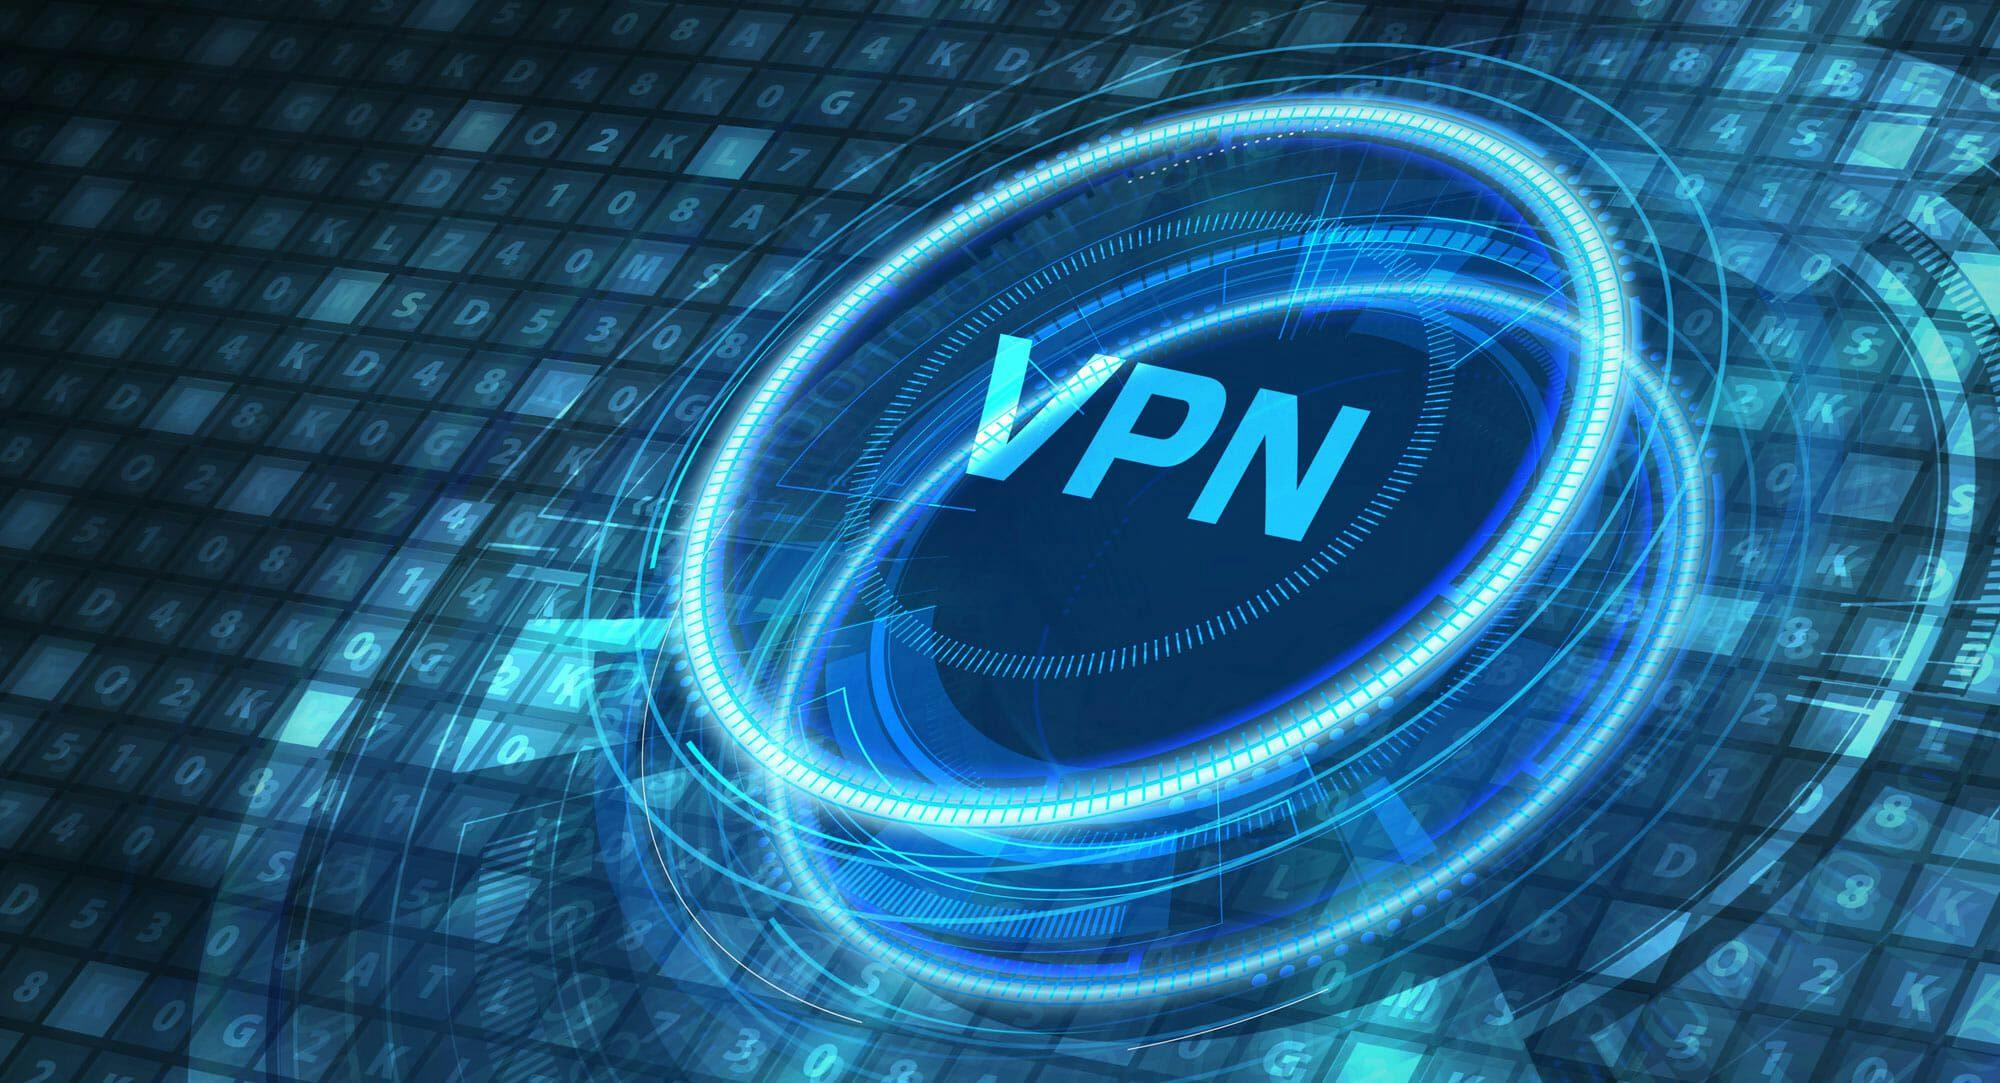 Raise your own VPN server with the protocol used in China